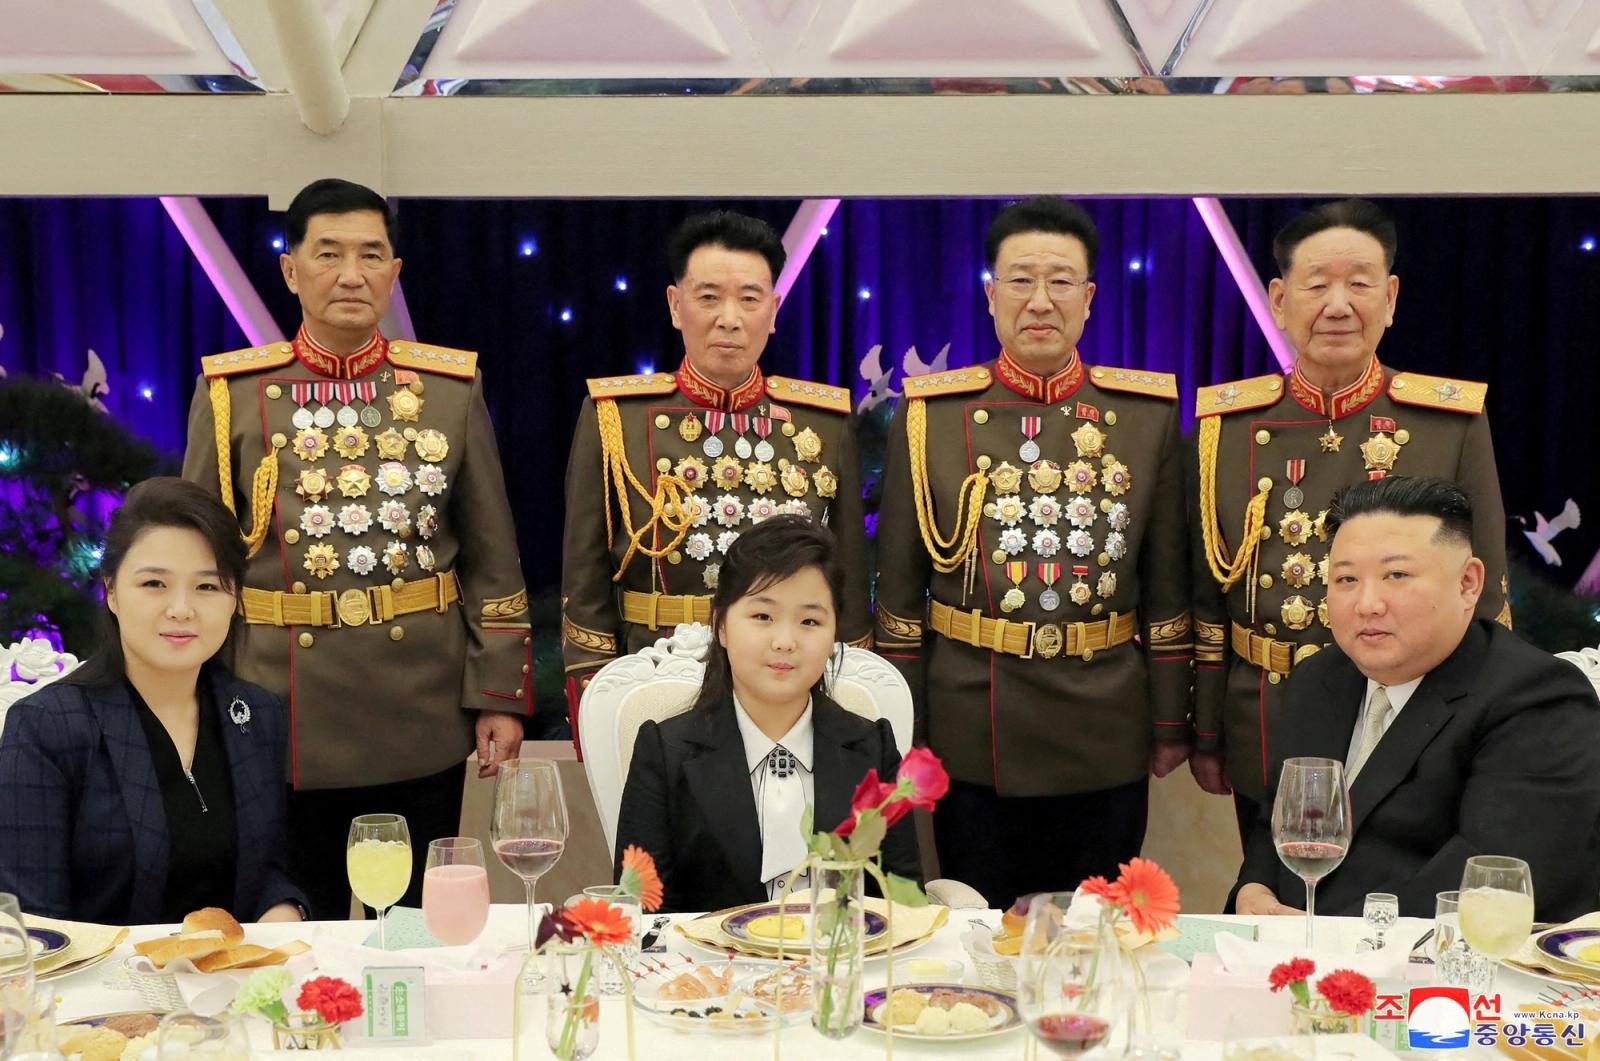 North Korean leader Kim Jong Un, his wife Ri Sol Ju and their daughter Kim Ju Ae attend a banquet to celebrate the 75th anniversary of the Korean People's Army the following day, in Pyongyang, North Korea February 7, 2023